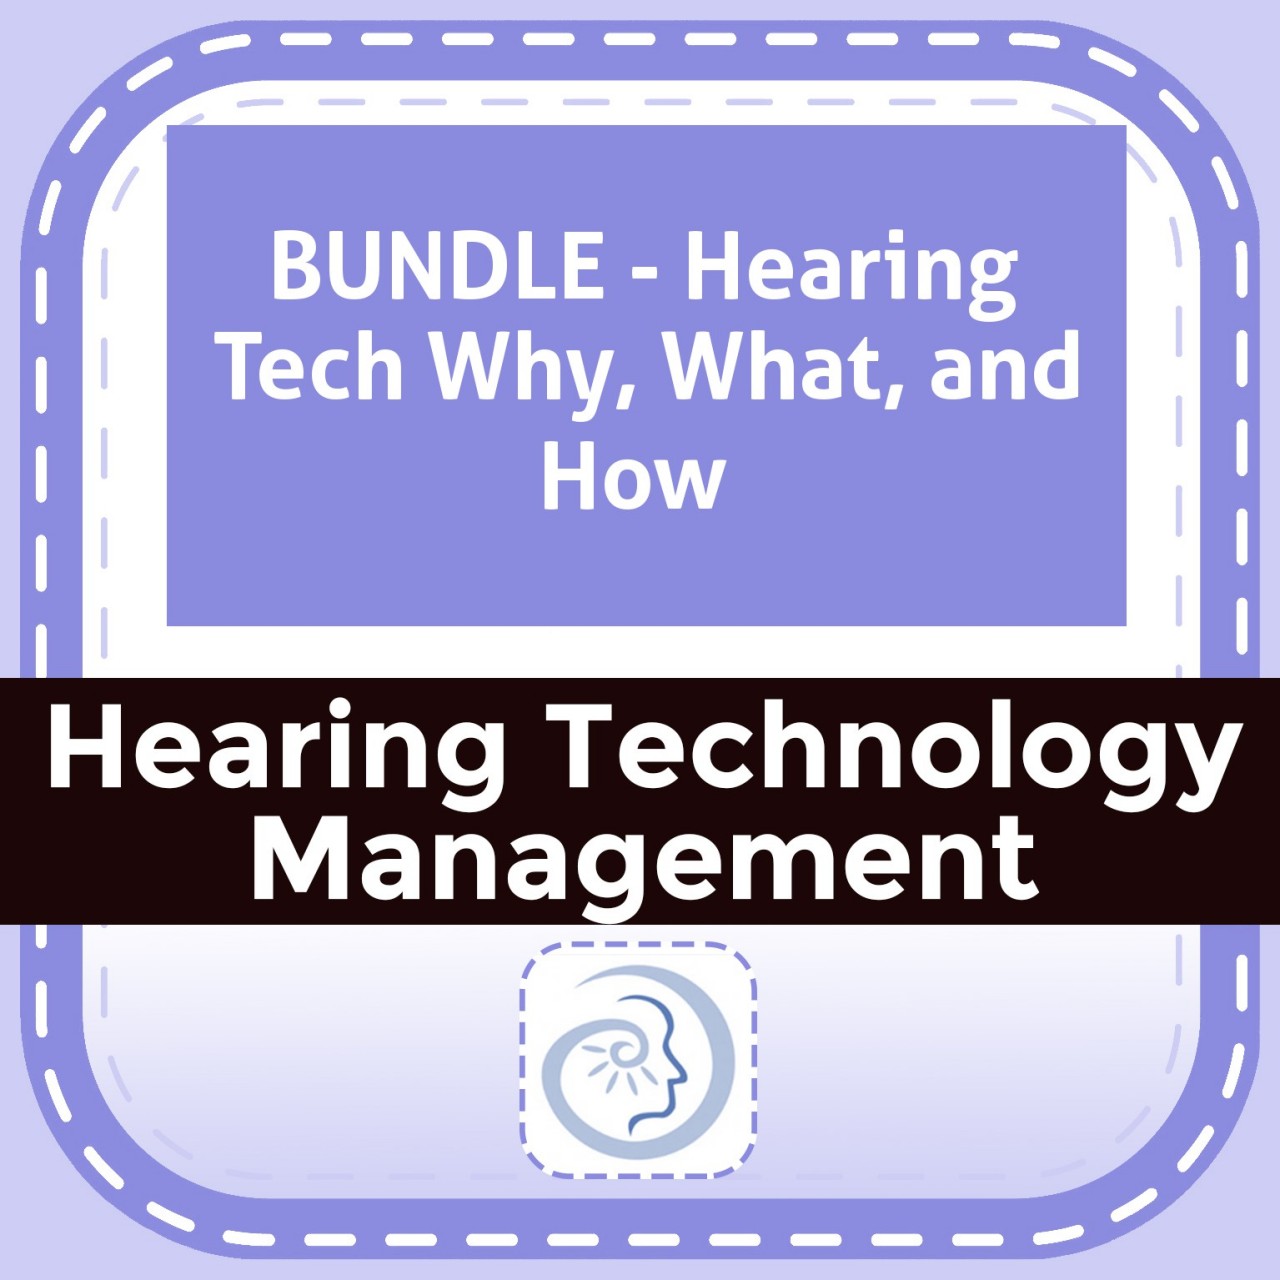 BUNDLE - Hearing Tech Why, What, and How